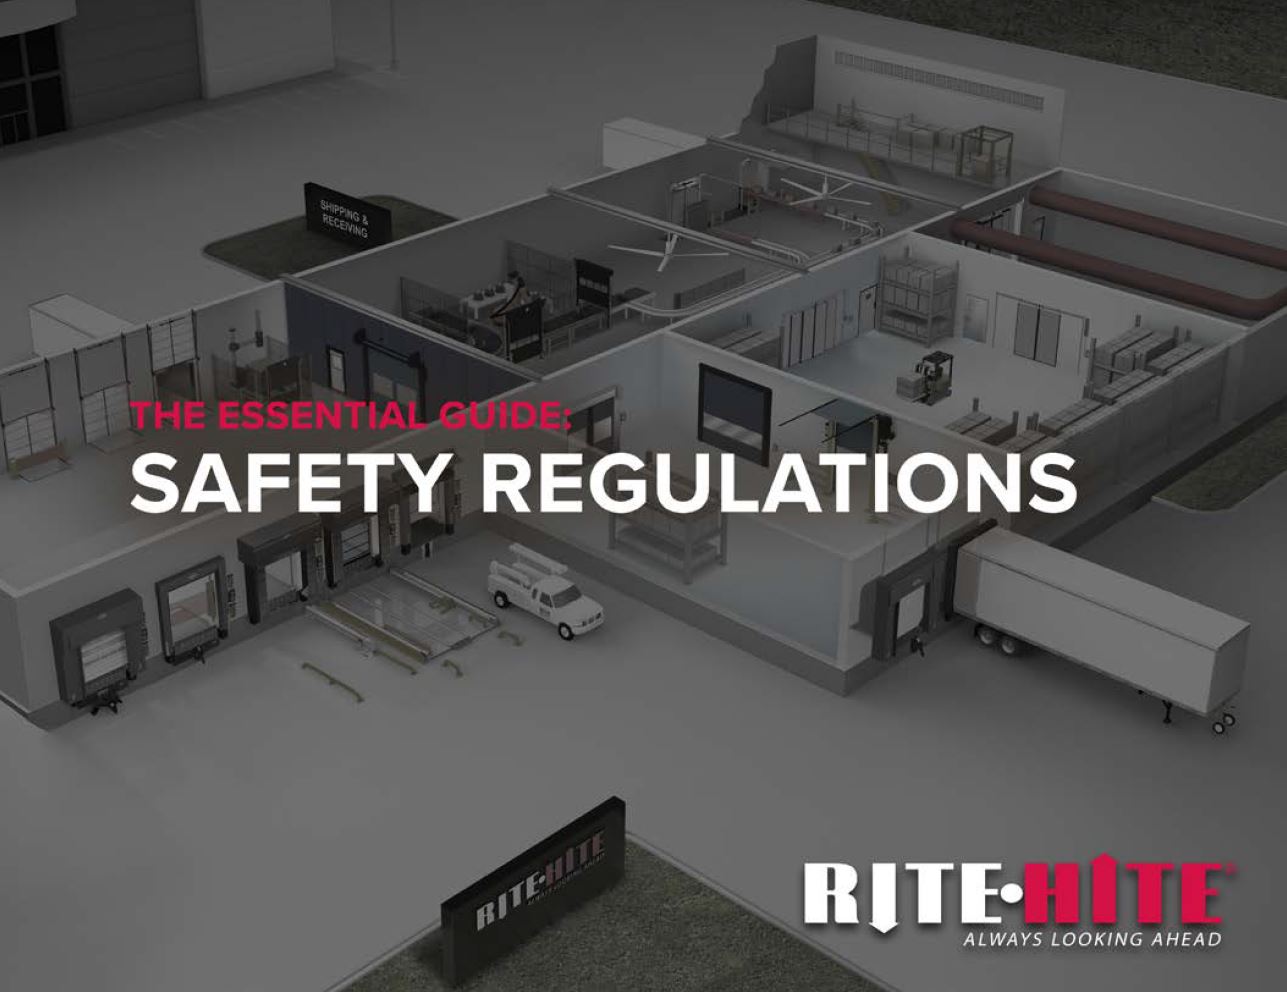 The Essential Guide: Safety Regulations